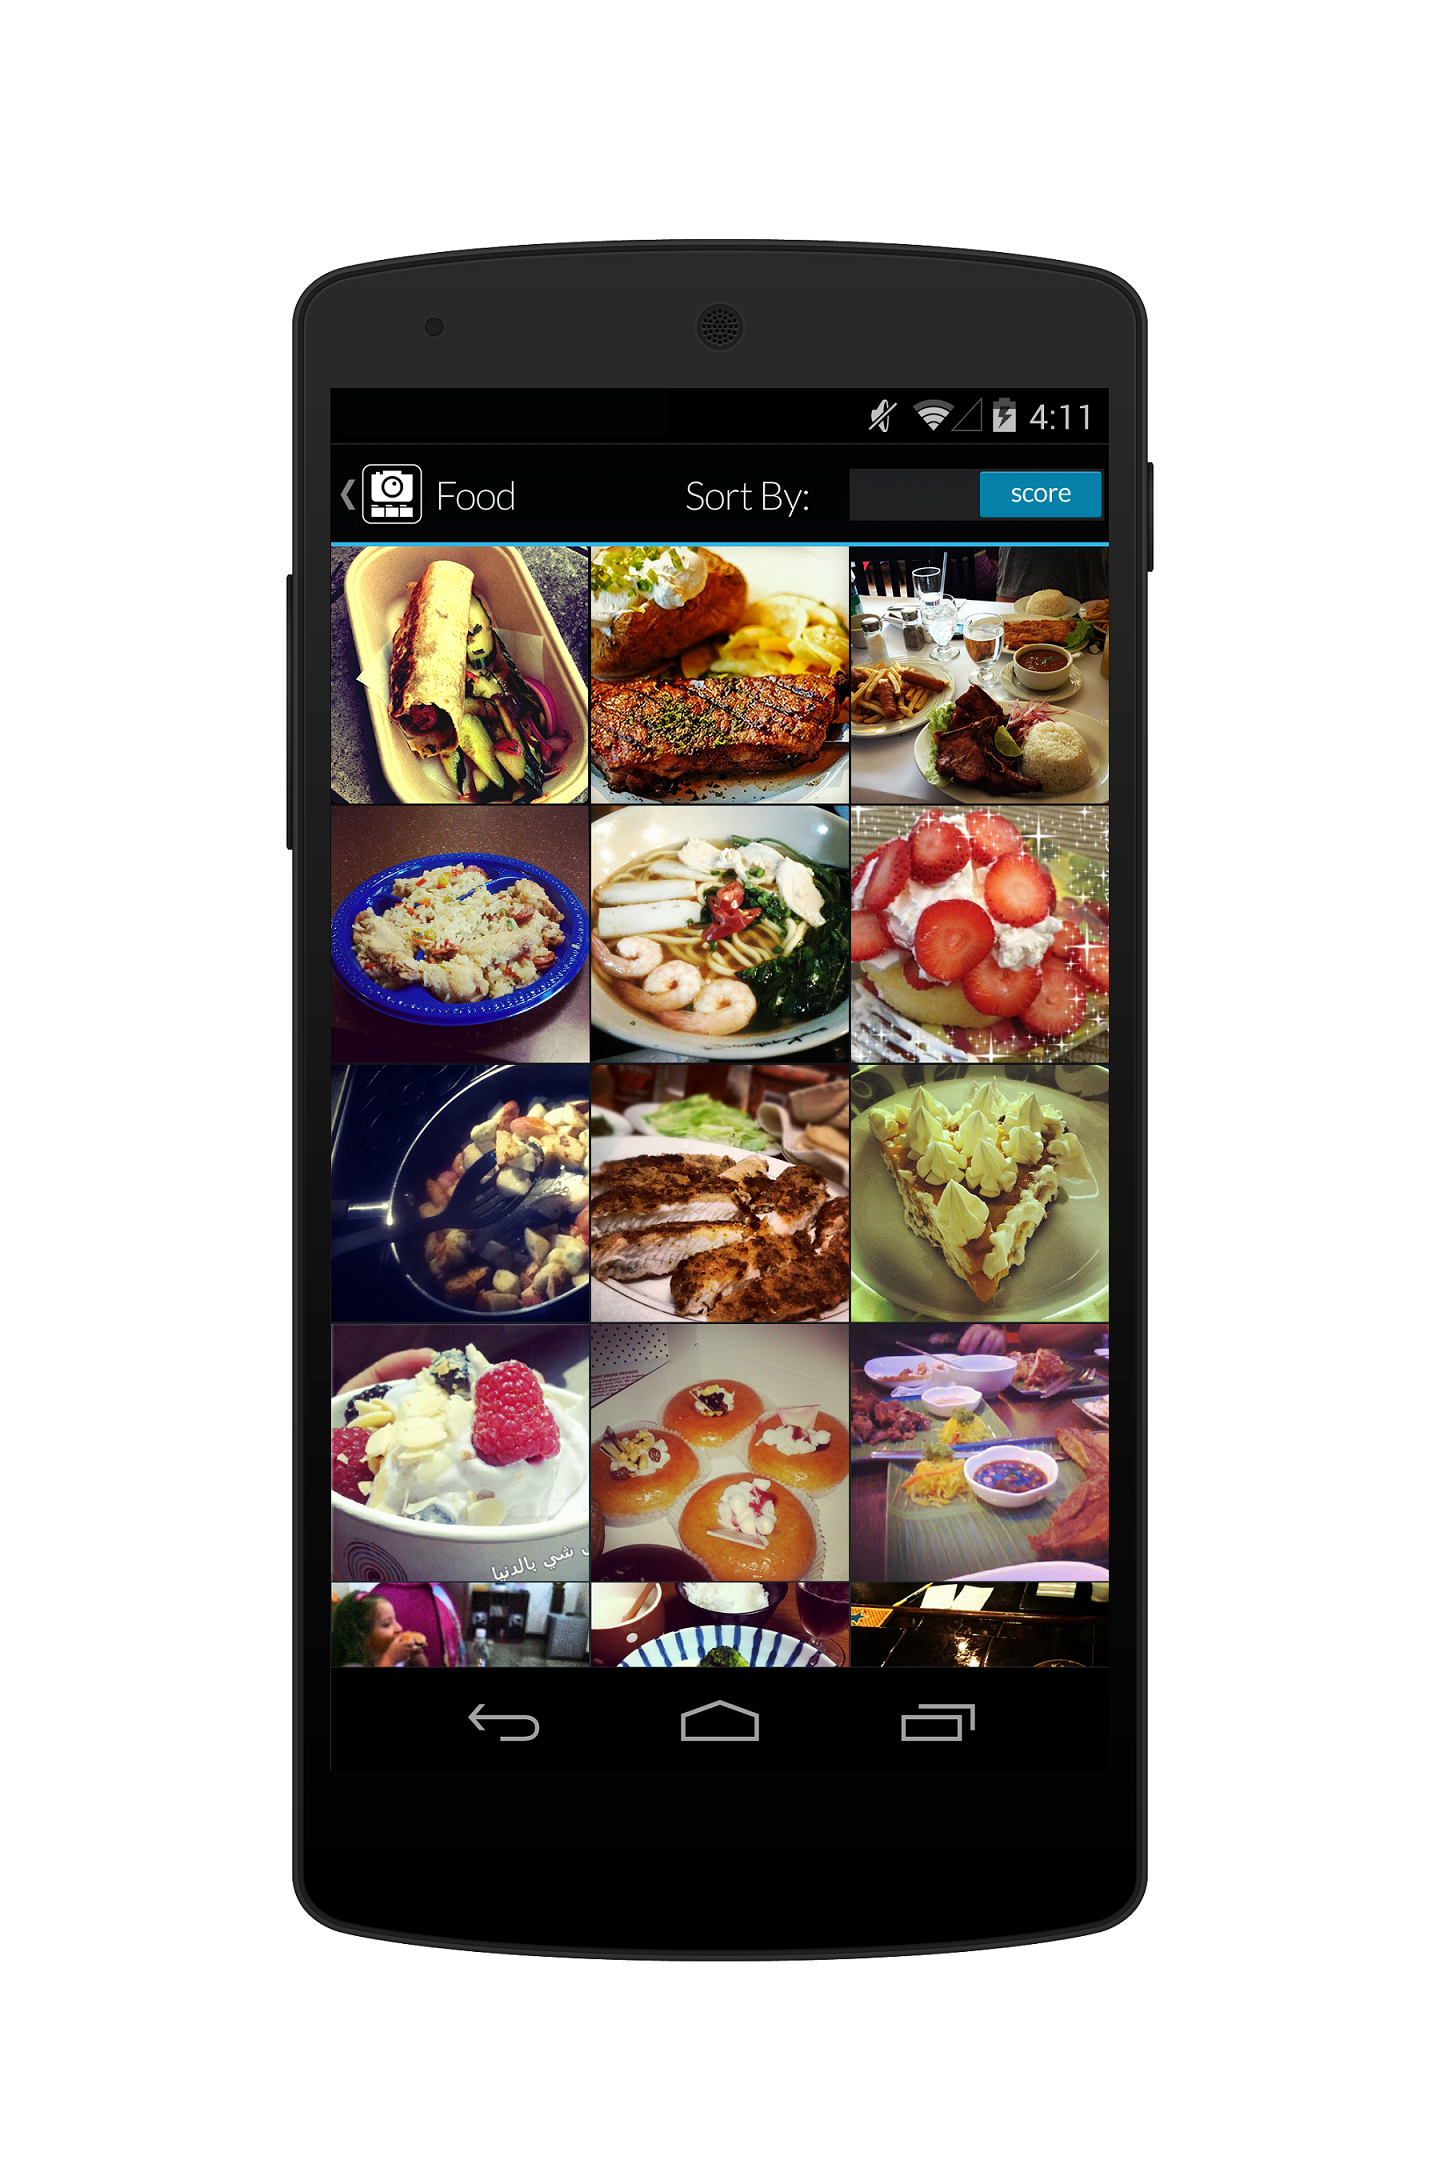 Screenshot of images sorted into the the food category